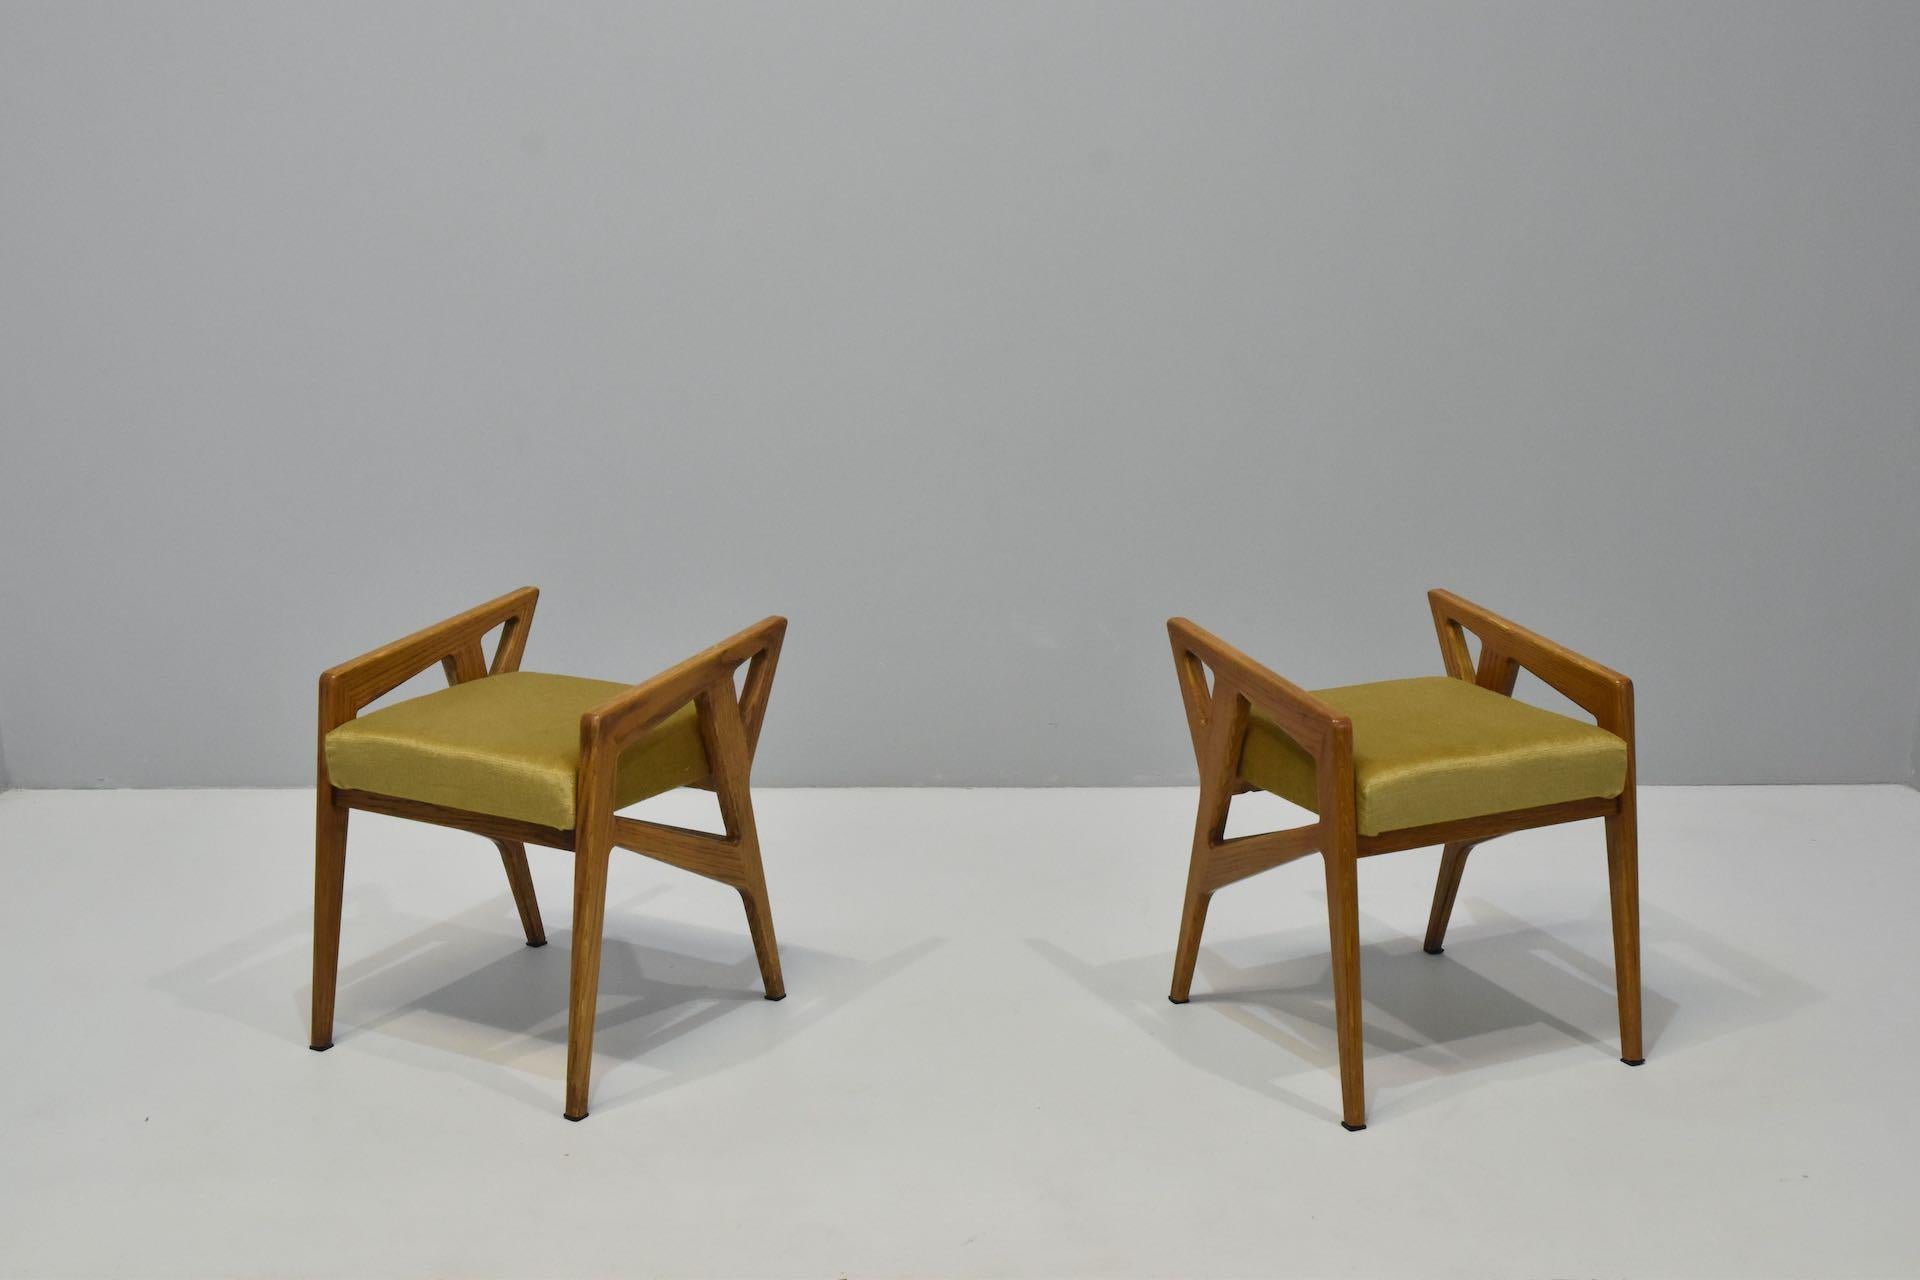 Rare pair of Gio Ponti arm stools 687 for Cassina, Italy, 1953 Upholstered in green fabric and in very good condition.